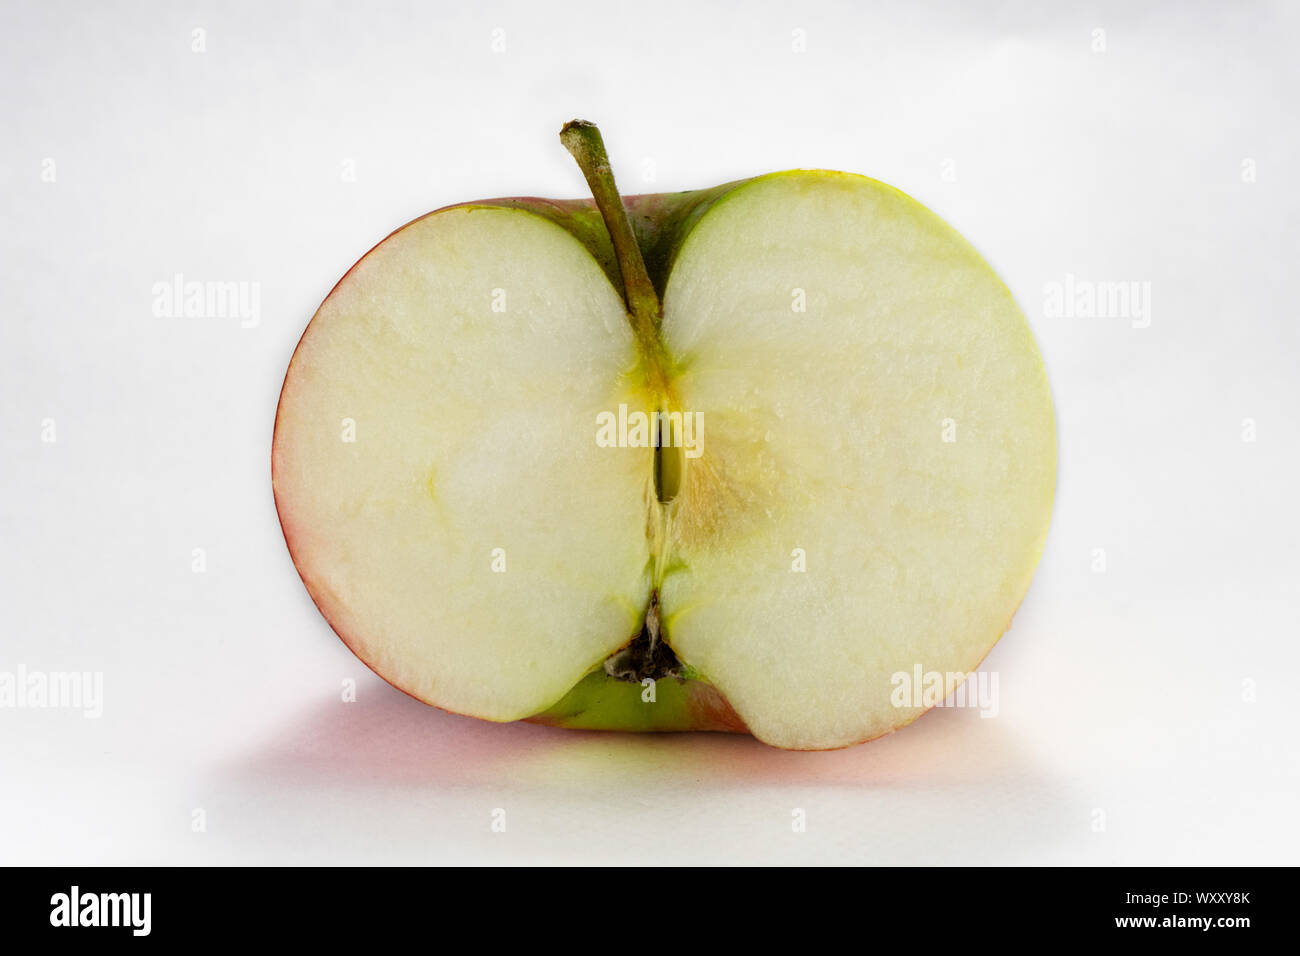 Bright vibrant fresh apple sliced in half. Photography taken on white backgound with macro lens. Stock Photo